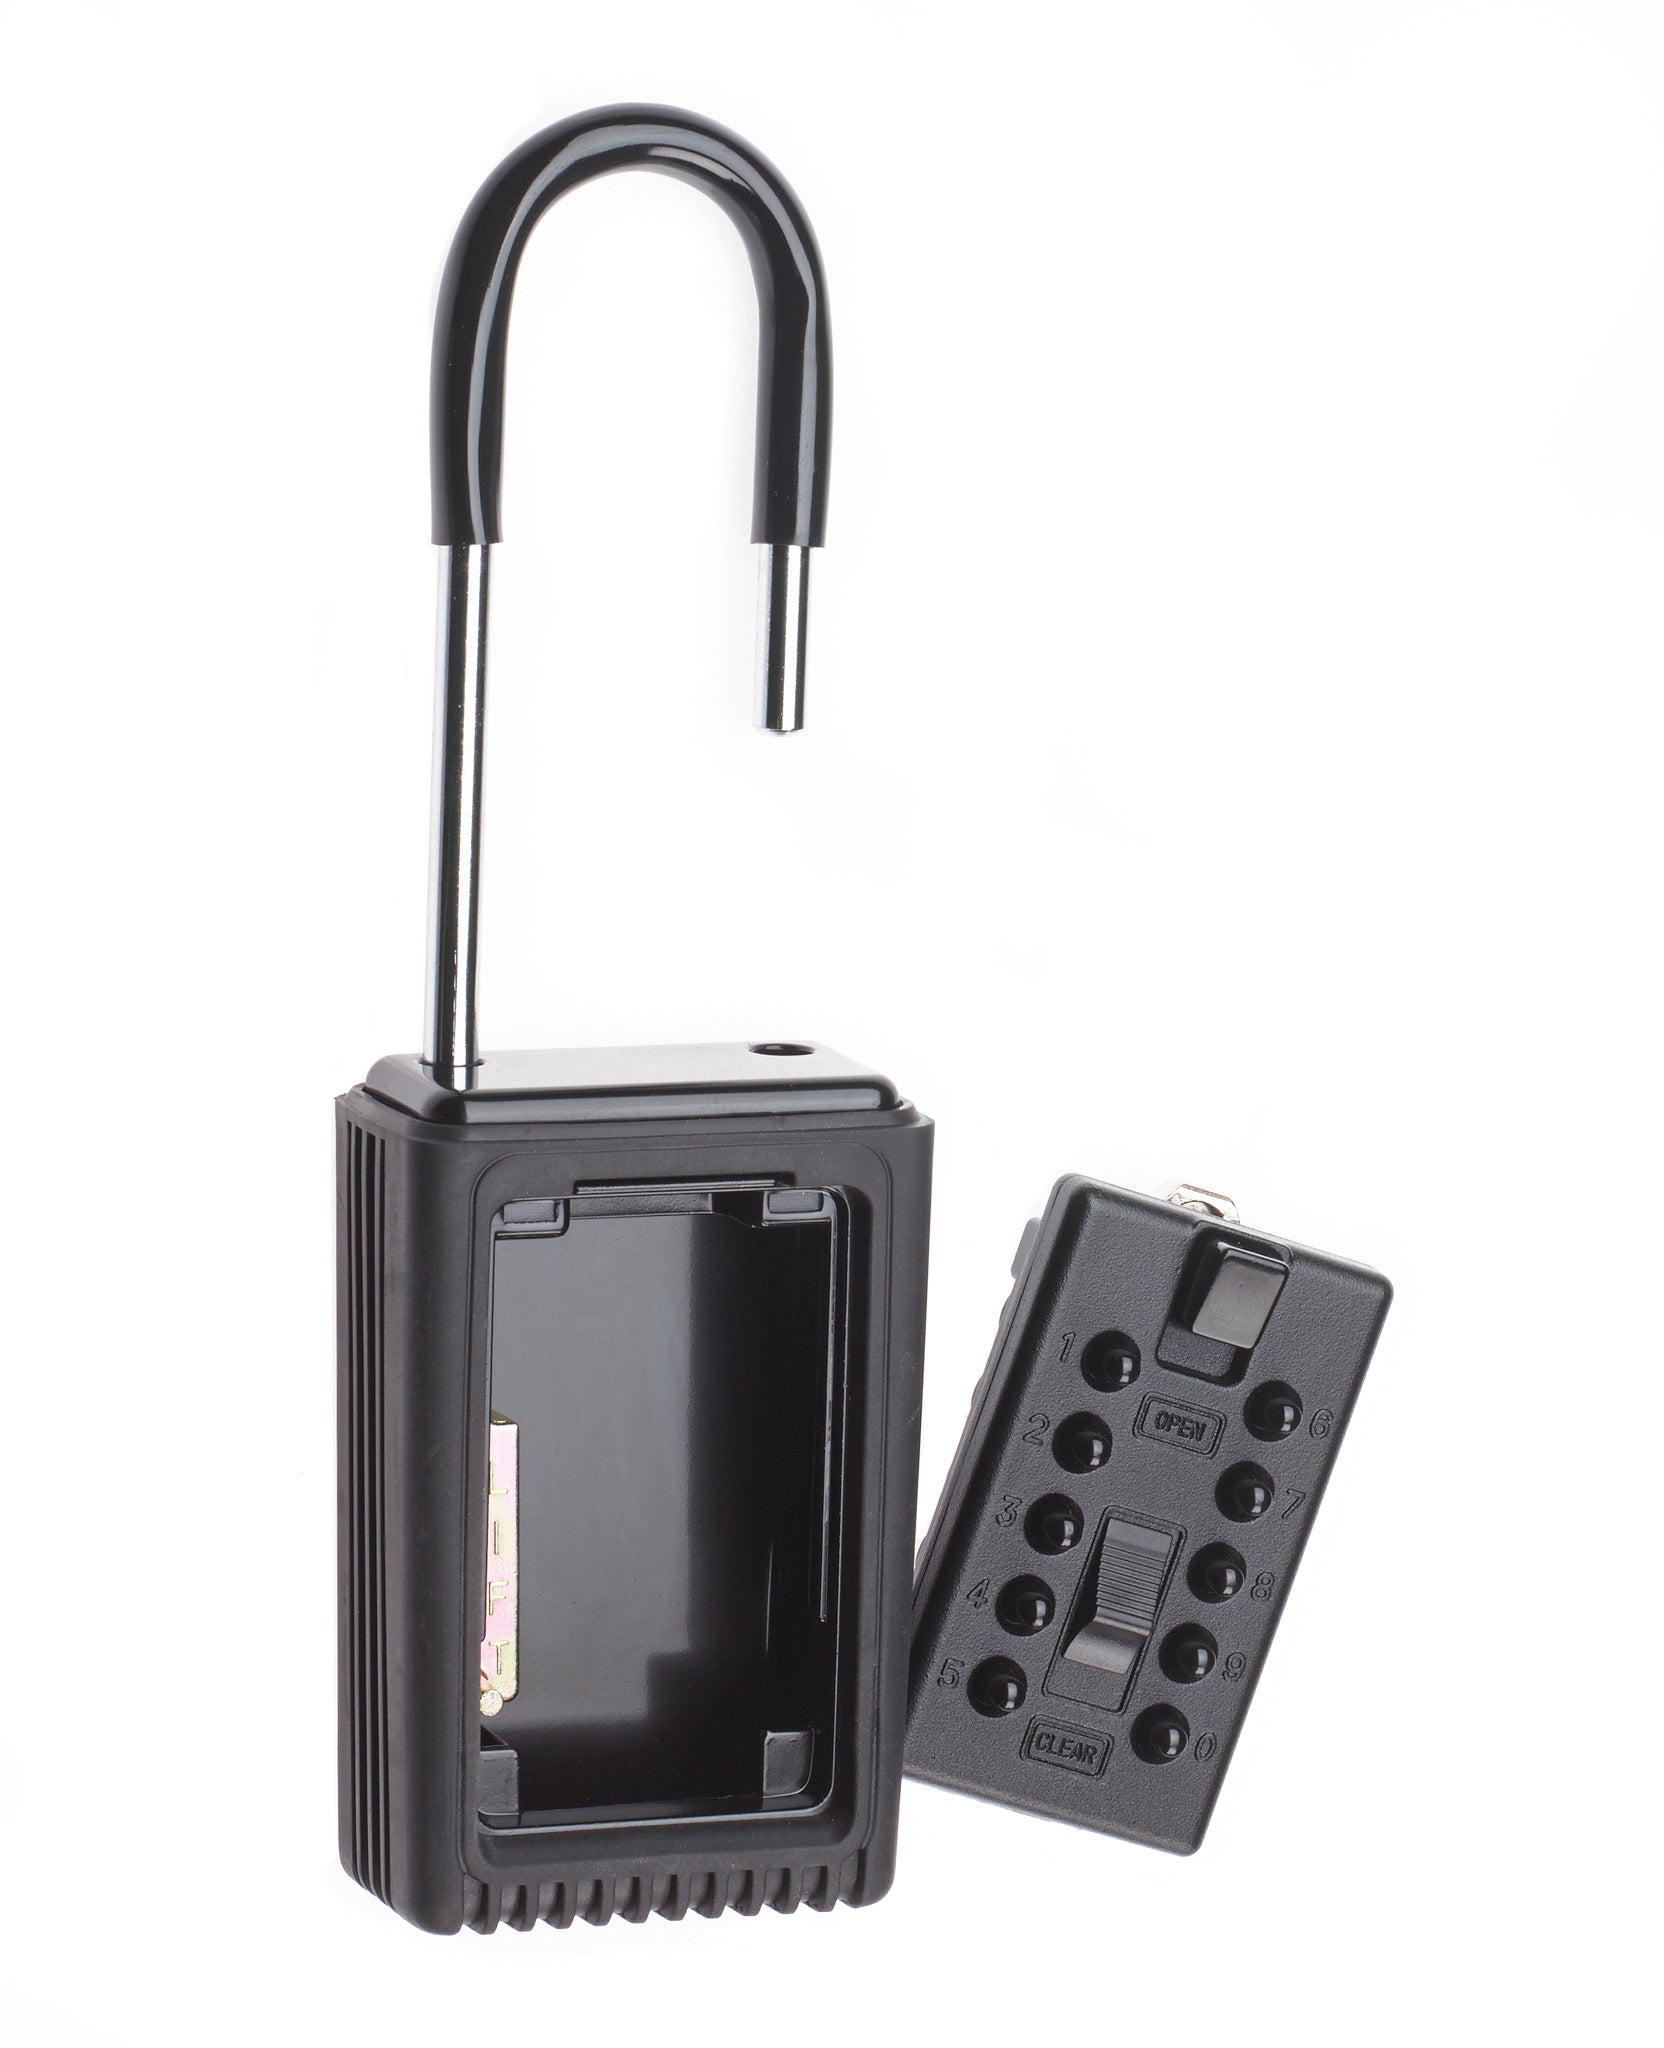 Open Supra portable key safe with unlocked shackle and detachable front